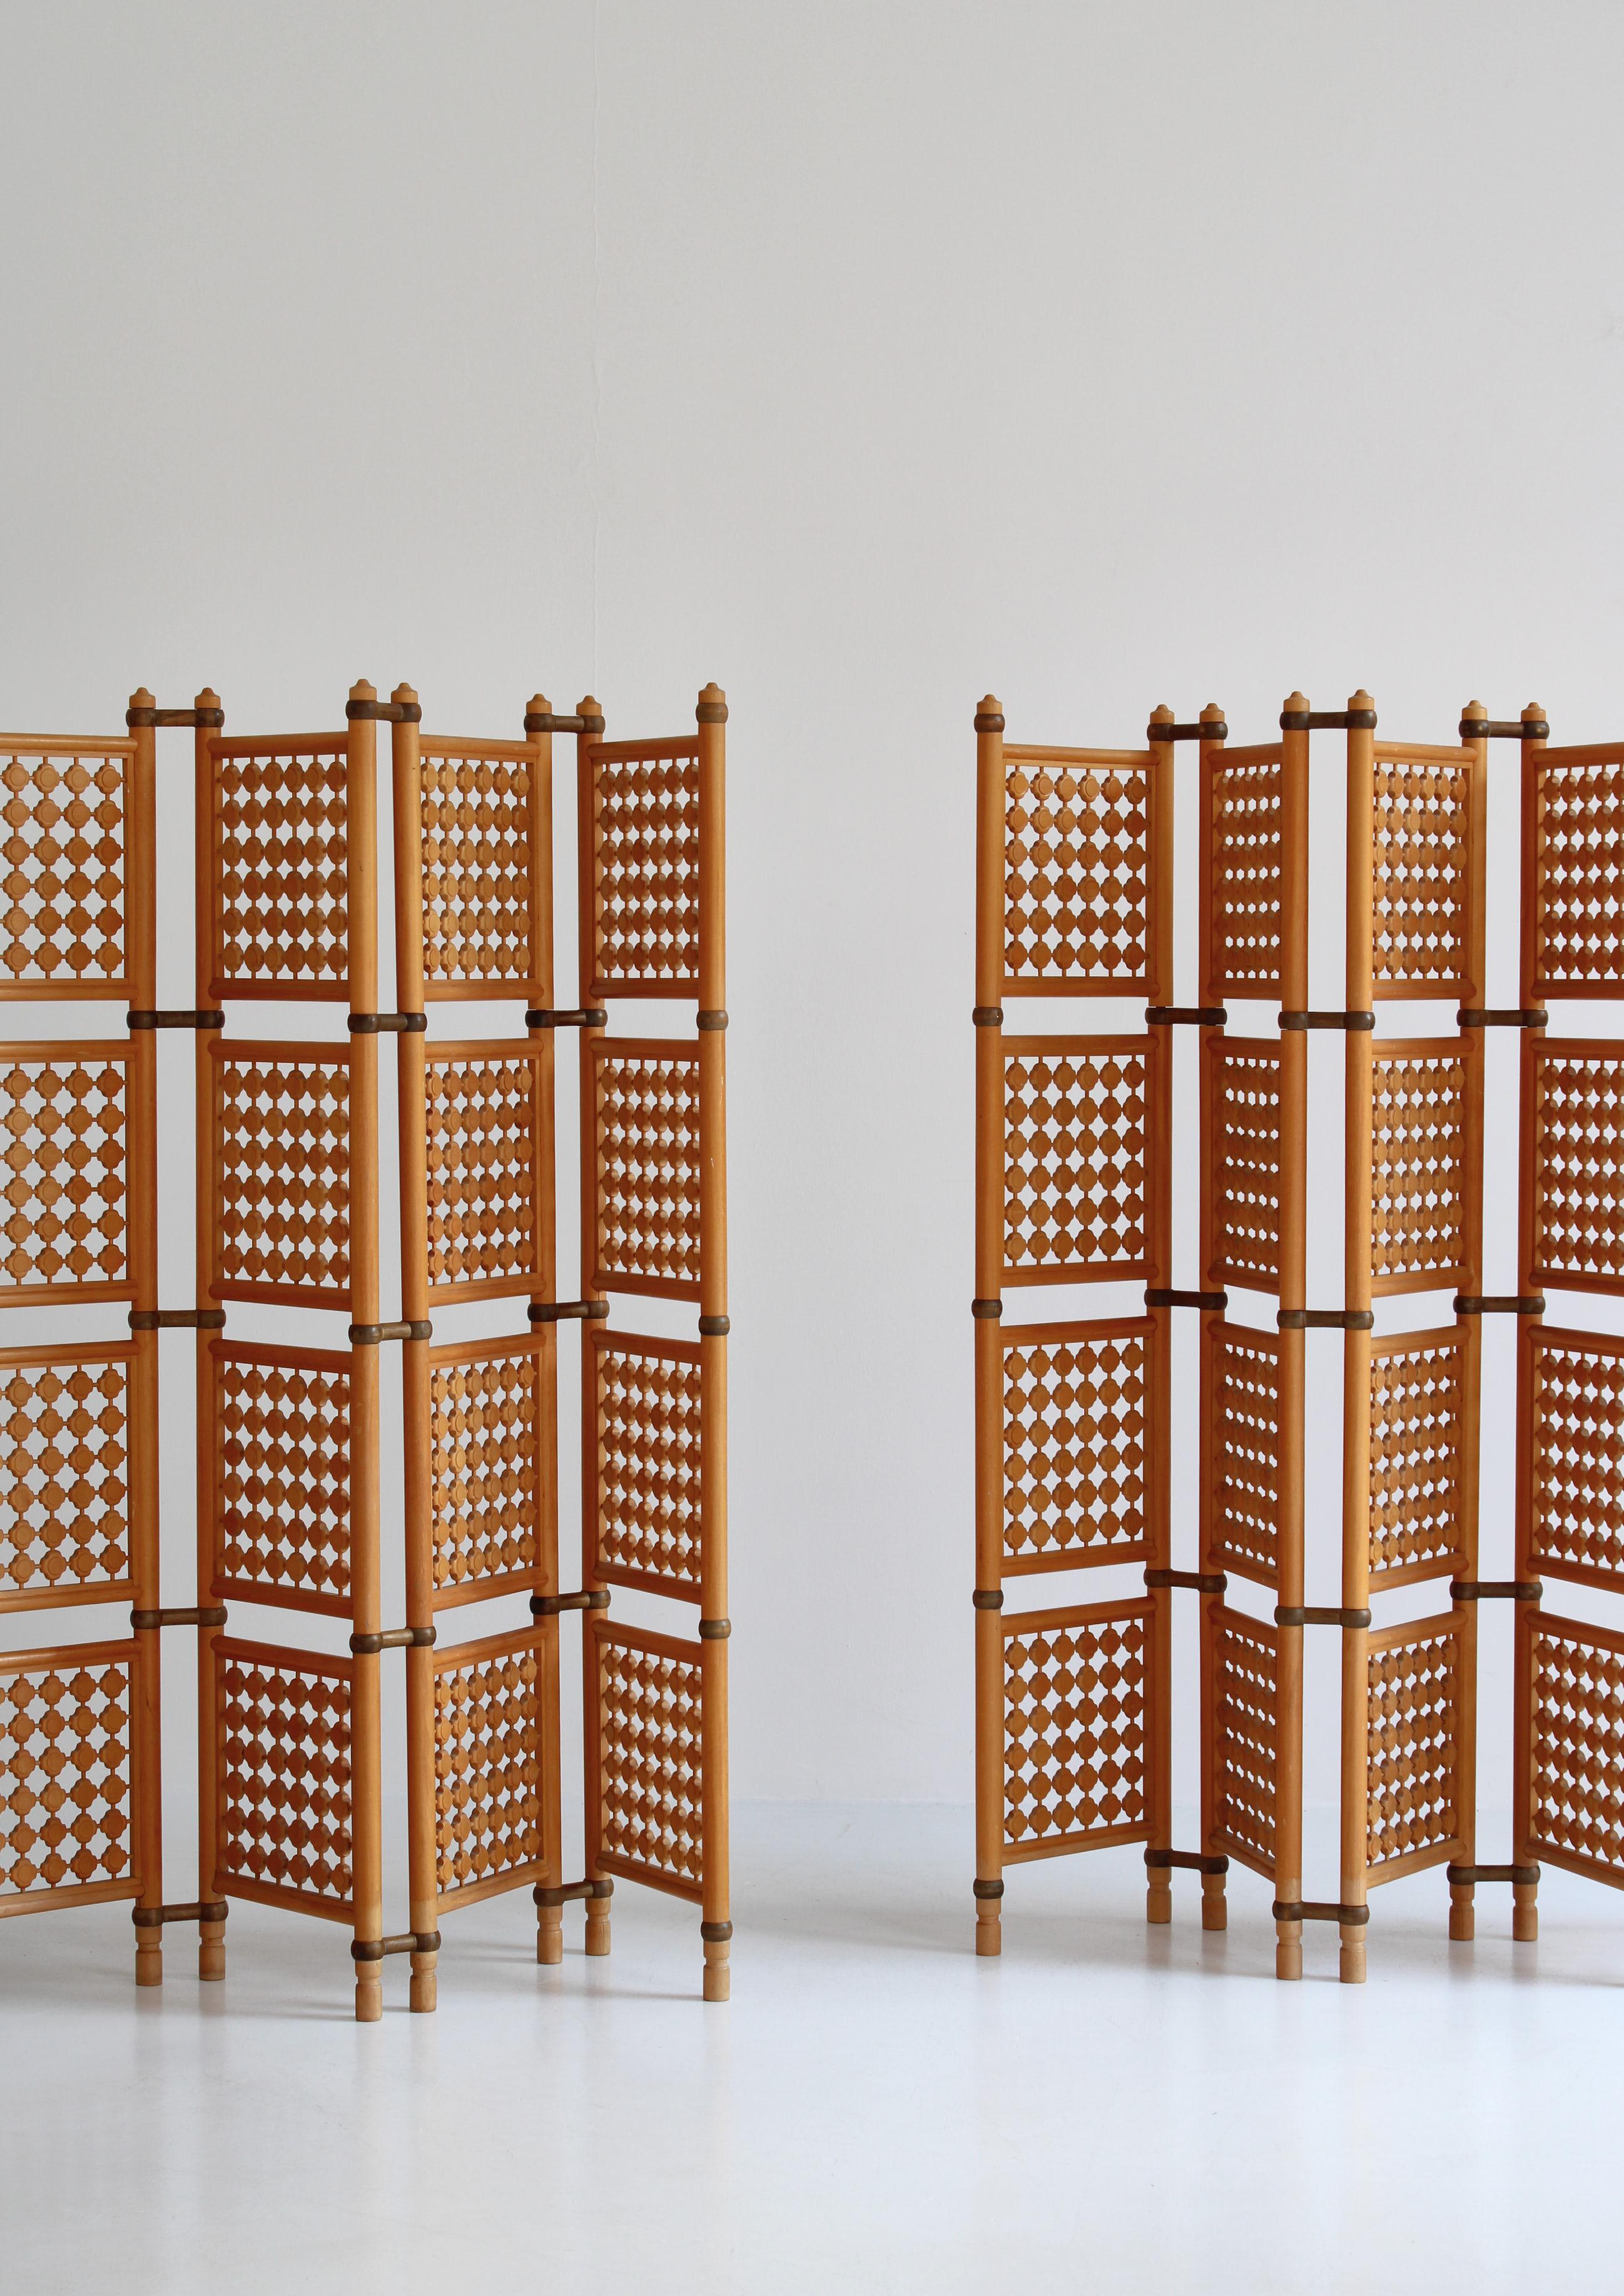 Set of Scandinavian Modern Screens or Room Dividers in Stained Beechwood, 1940s For Sale 1